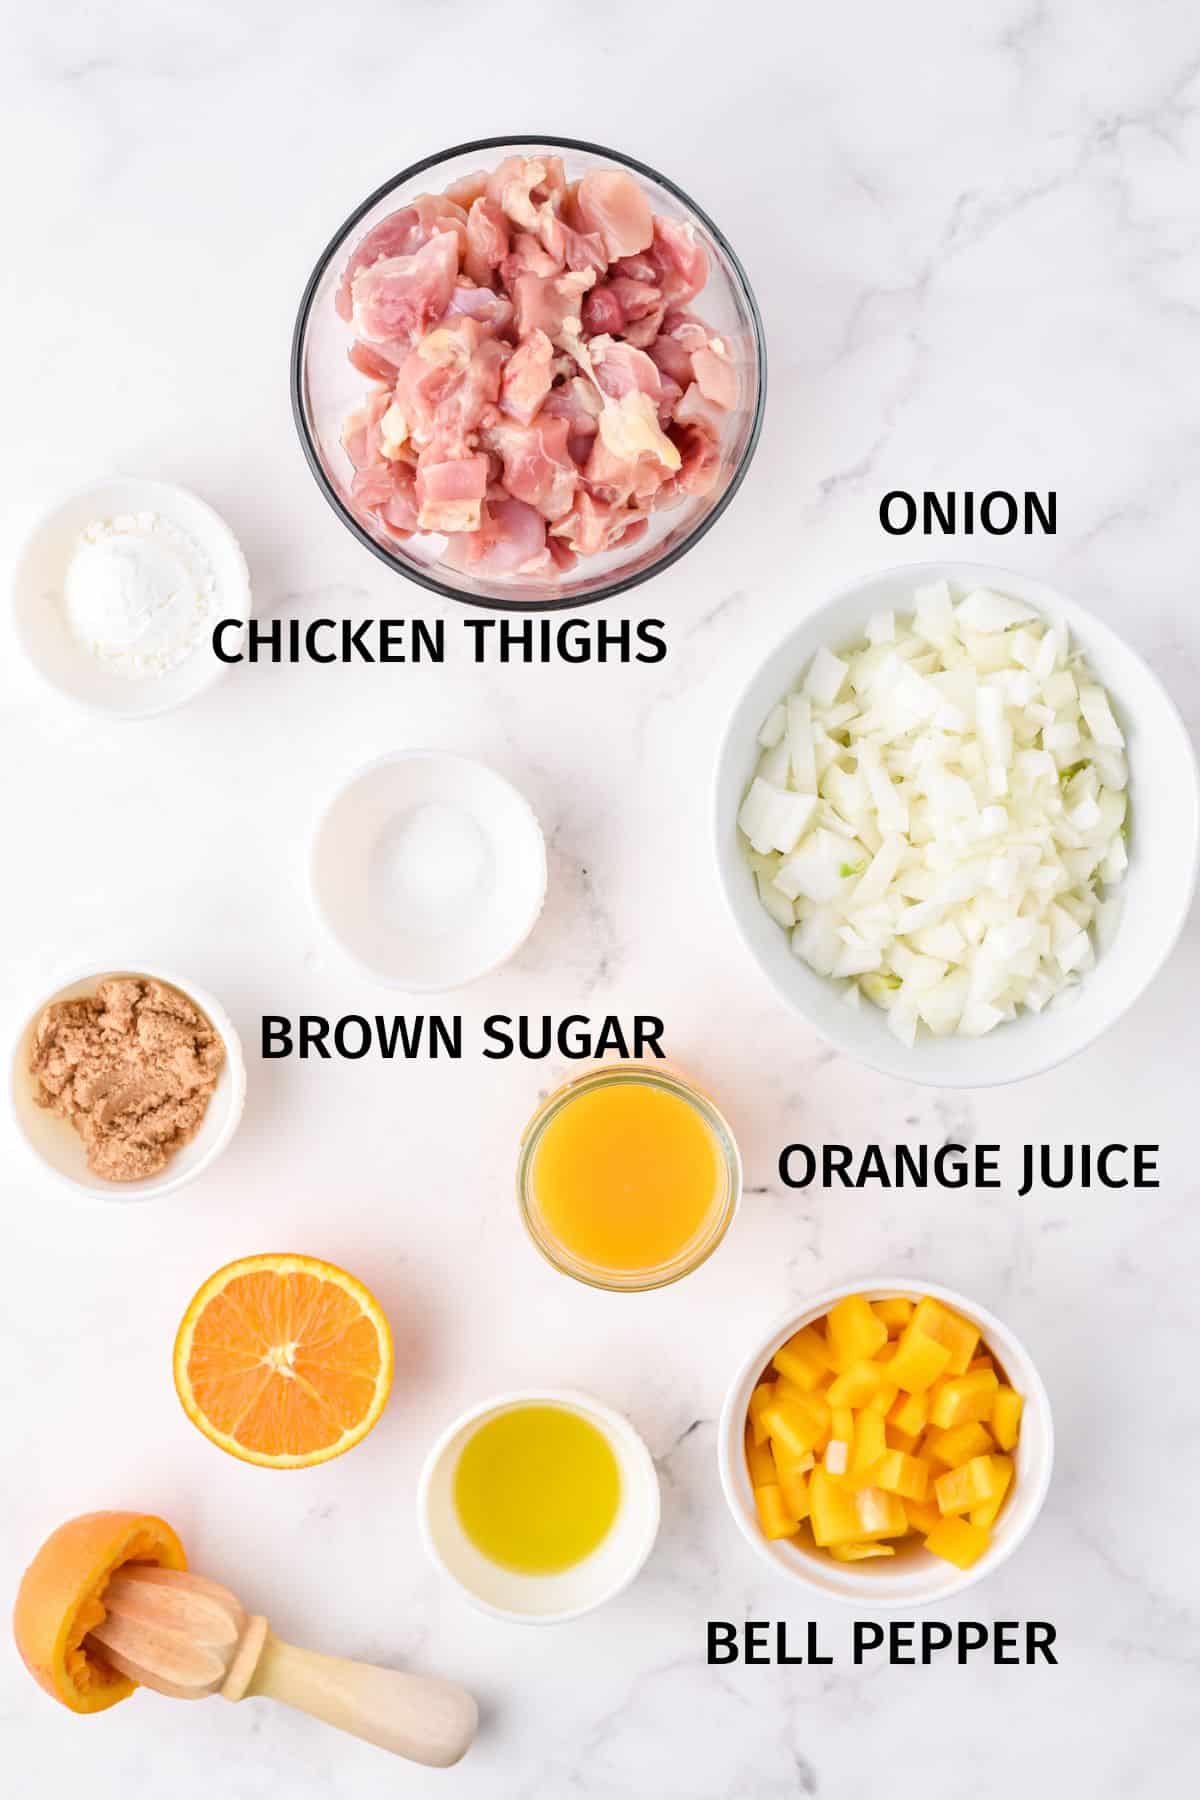 Ingredients for Instant Pot orange chicken in small bowls on a white surface.